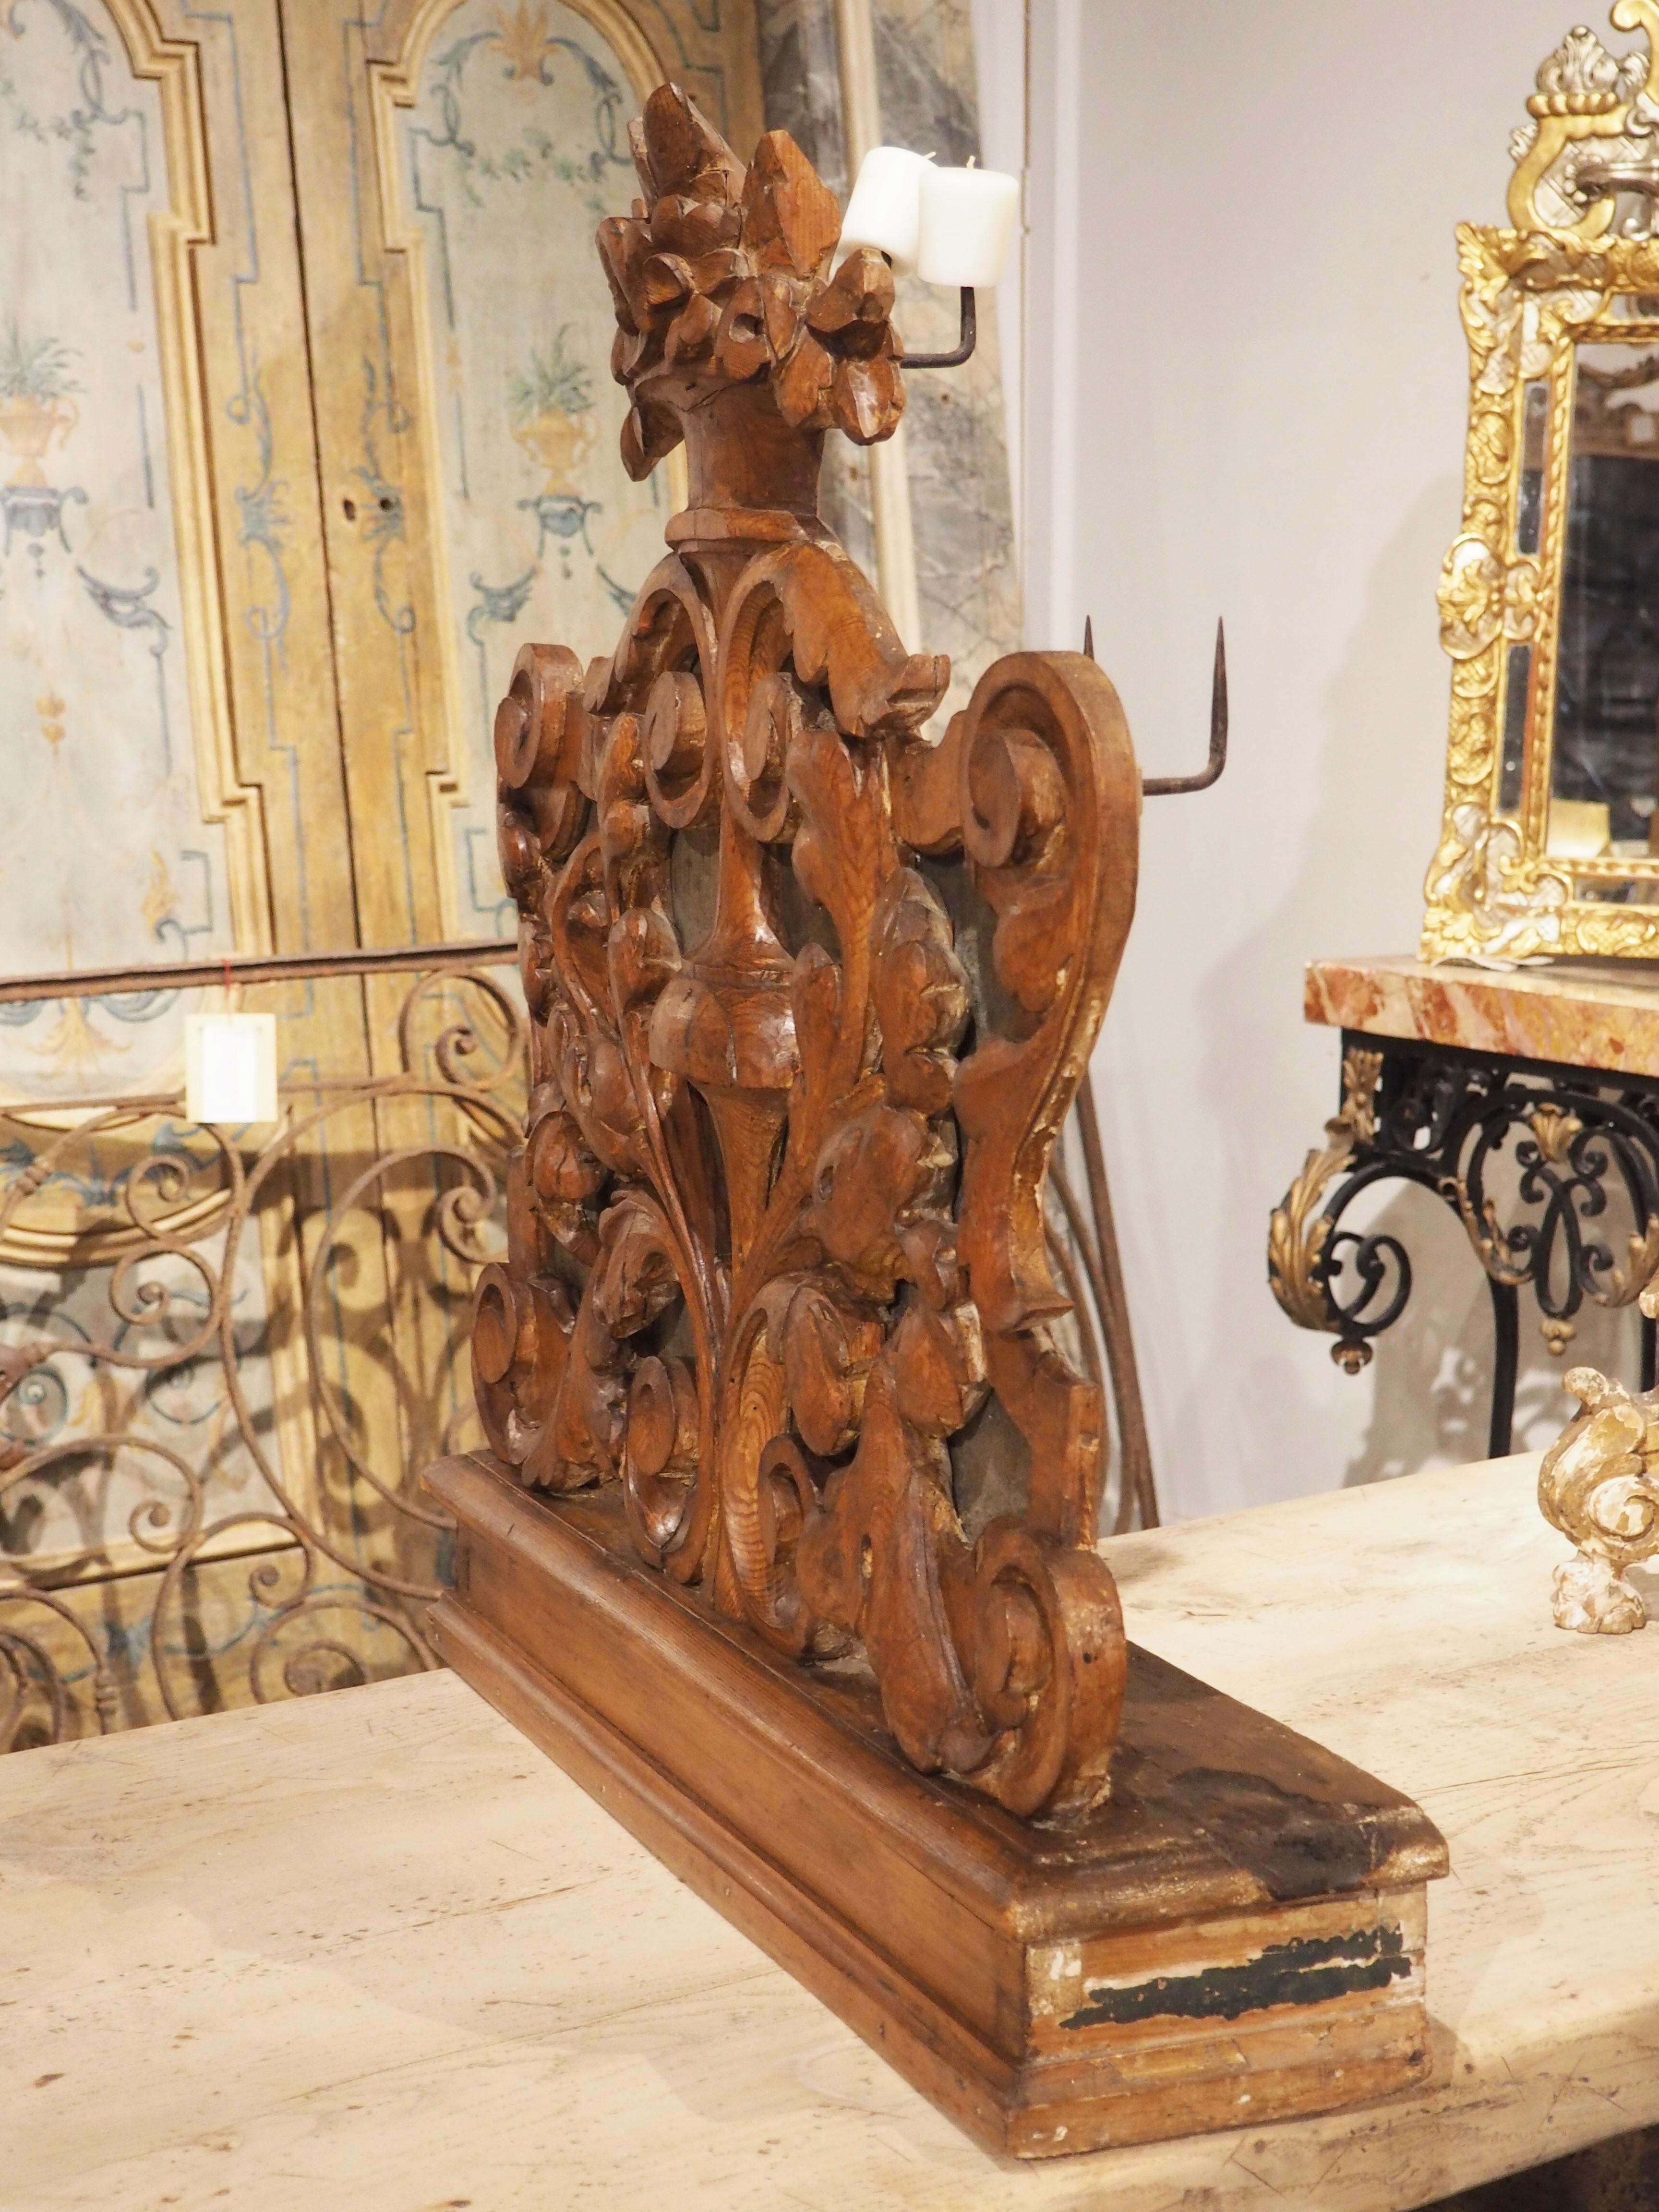 hand carved from pine in the 1700s, this unique Italian altar candlestick holder features a lovely foliate rinceaux dotted with volute scrolls. The intricate weaving of curled leaves is topped by a floral bouquet. There are seven iron prickets on